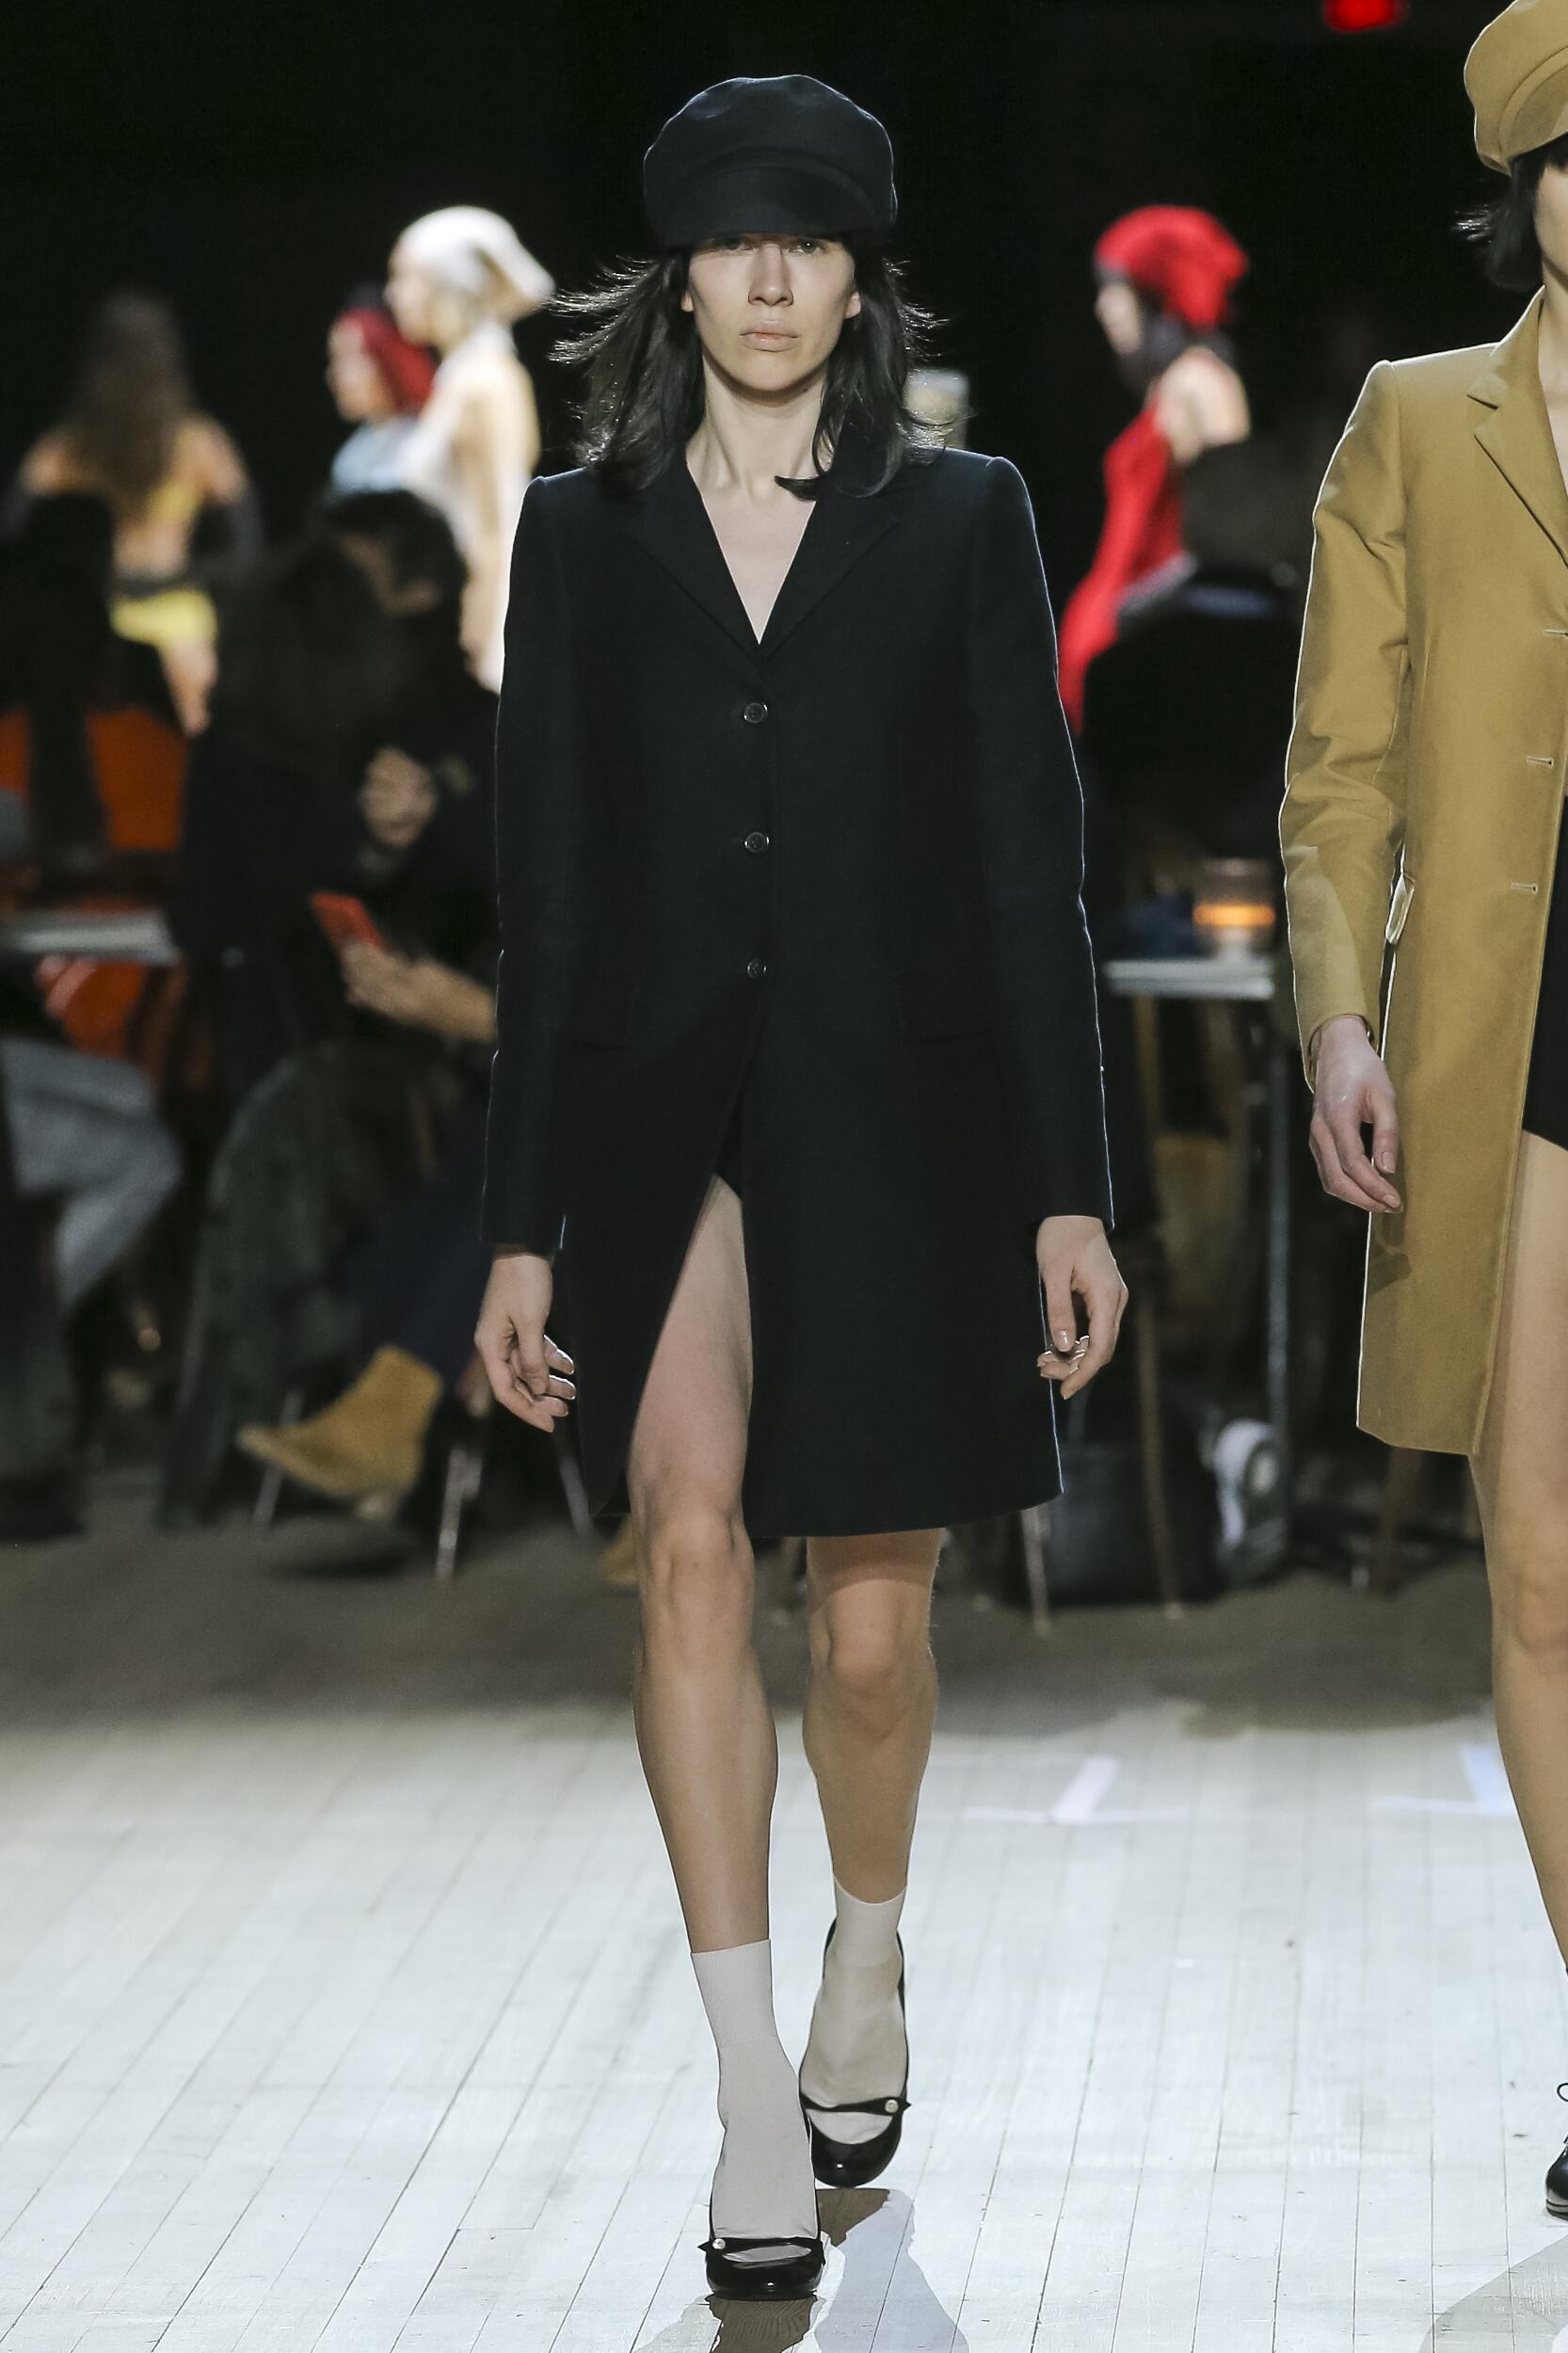 MARC JACOBS FALL WINTER 2020 WOMEN'S COLLECTION | The Skinny Beep